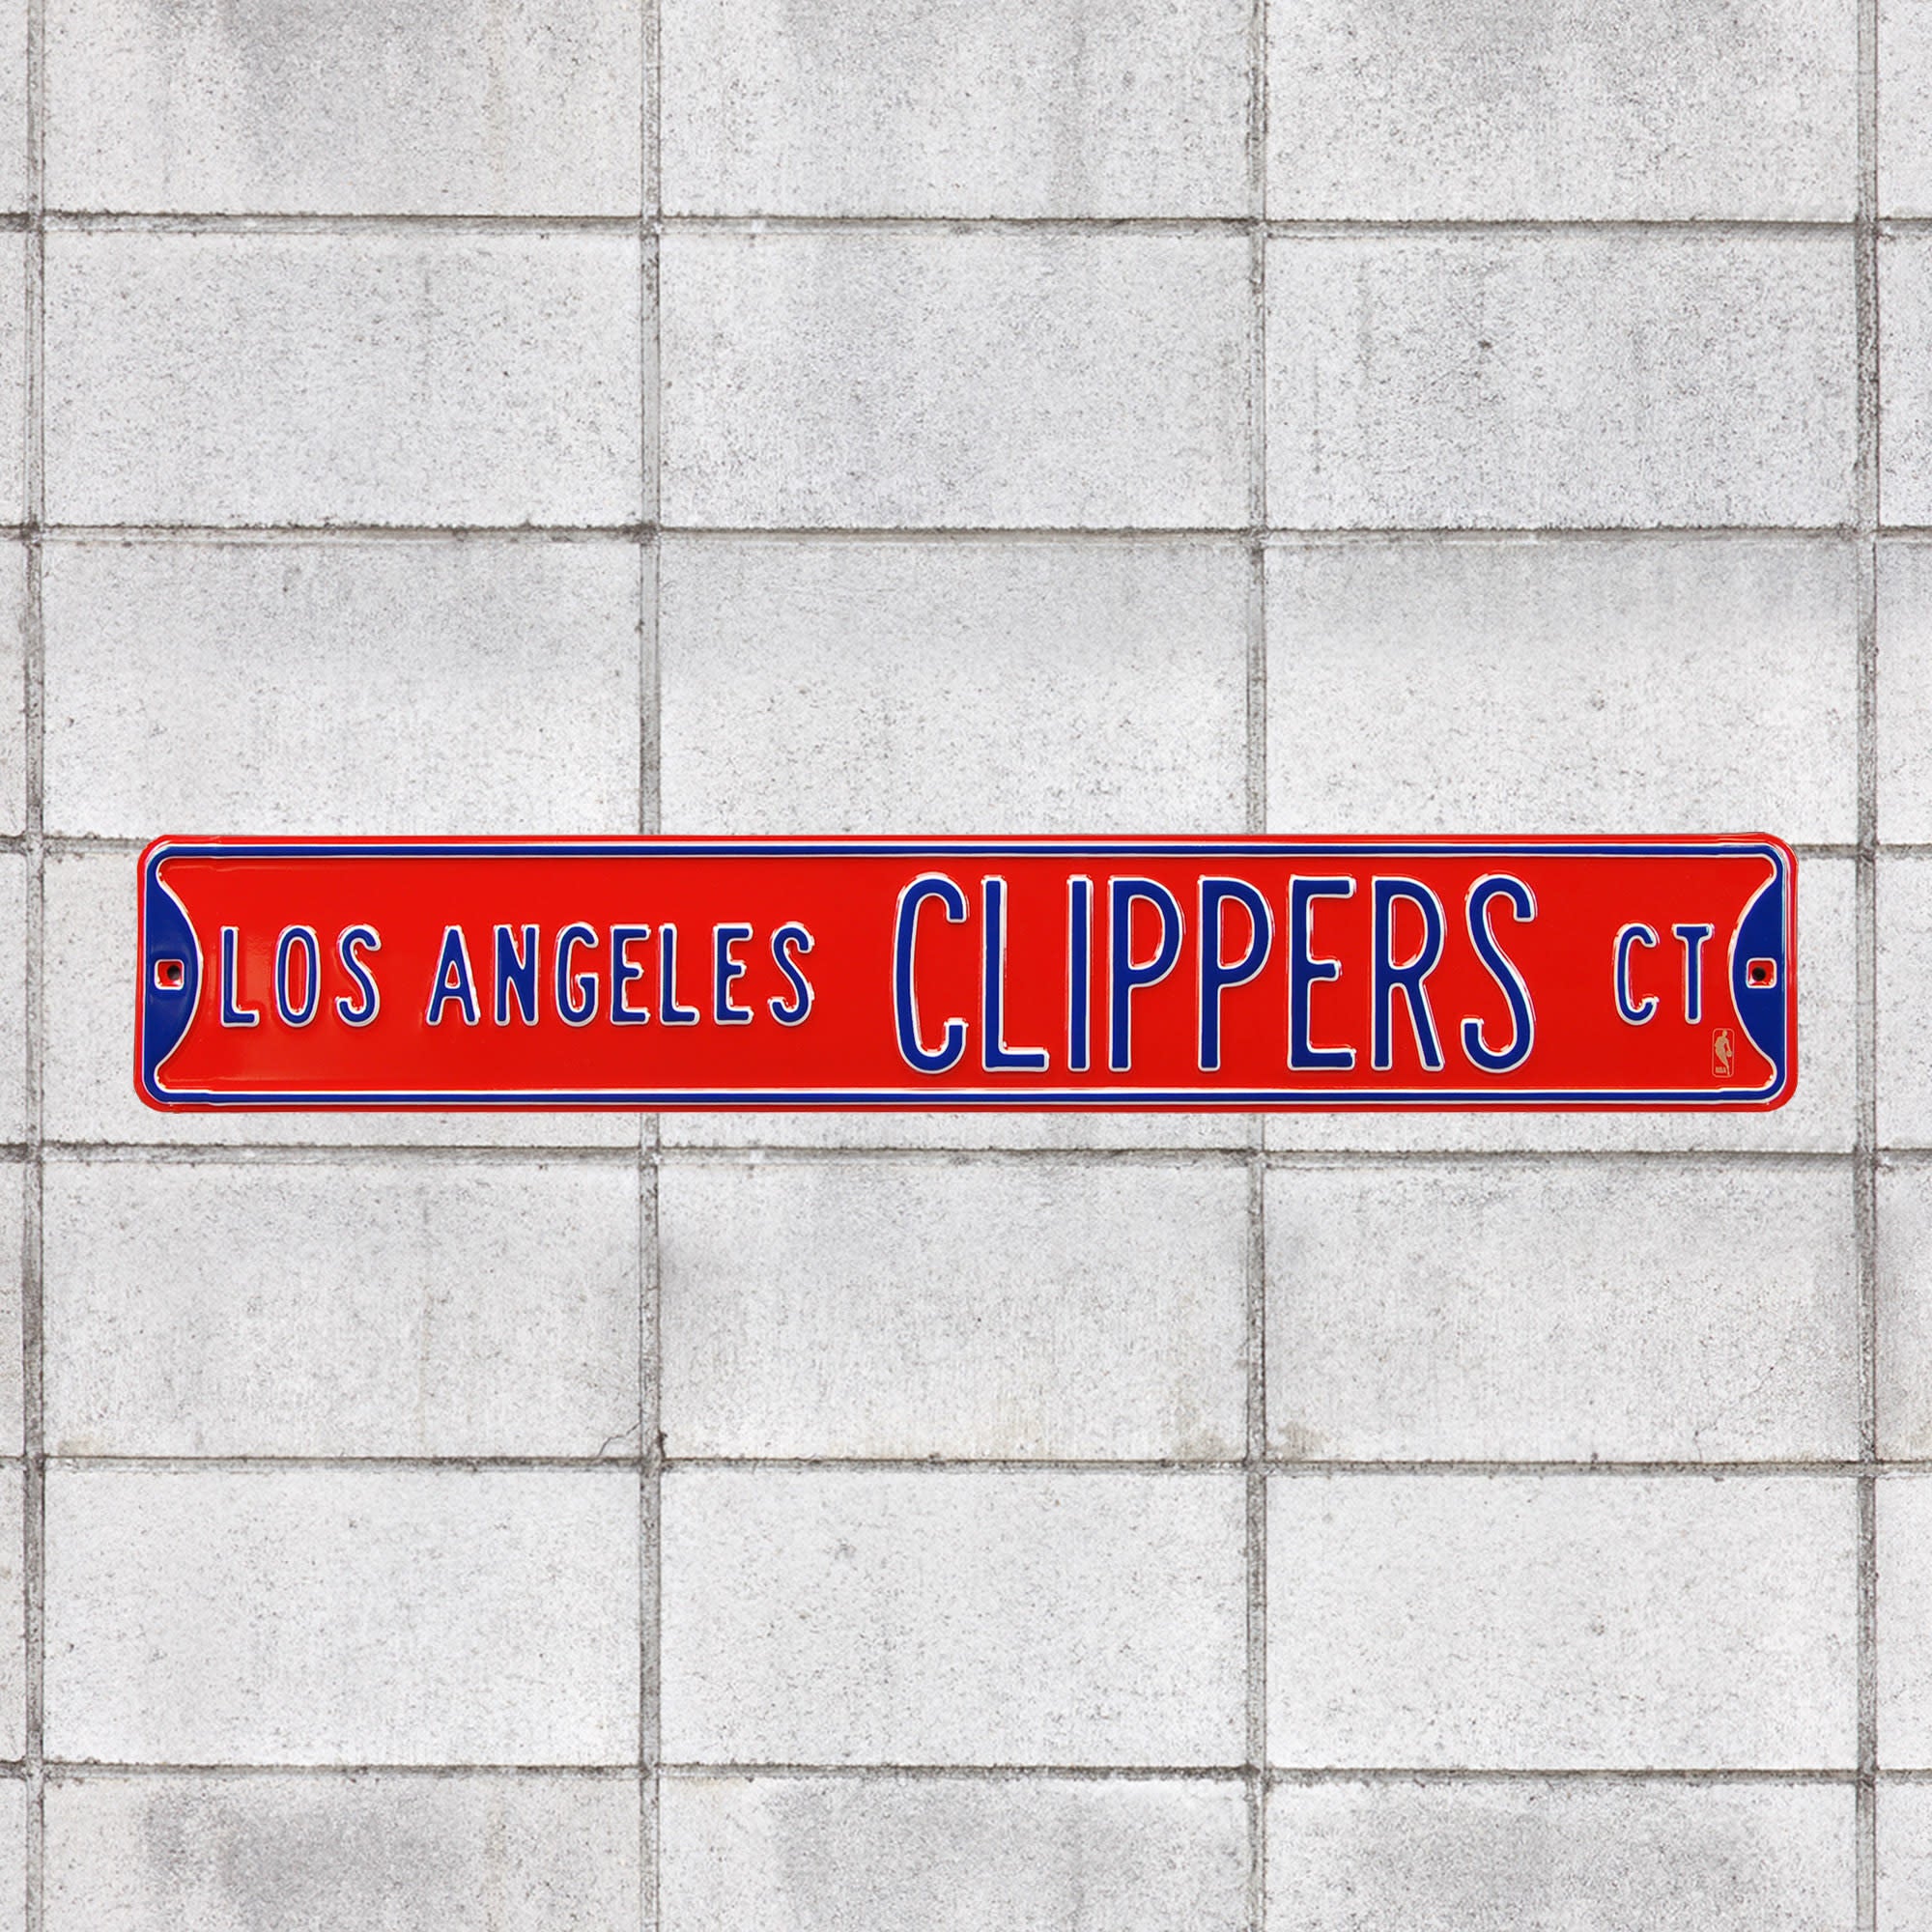 Los Angeles Clippers: Court - Officially Licensed NBA Metal Street Sign 36.0"W x 6.0"H by Fathead | 100% Steel